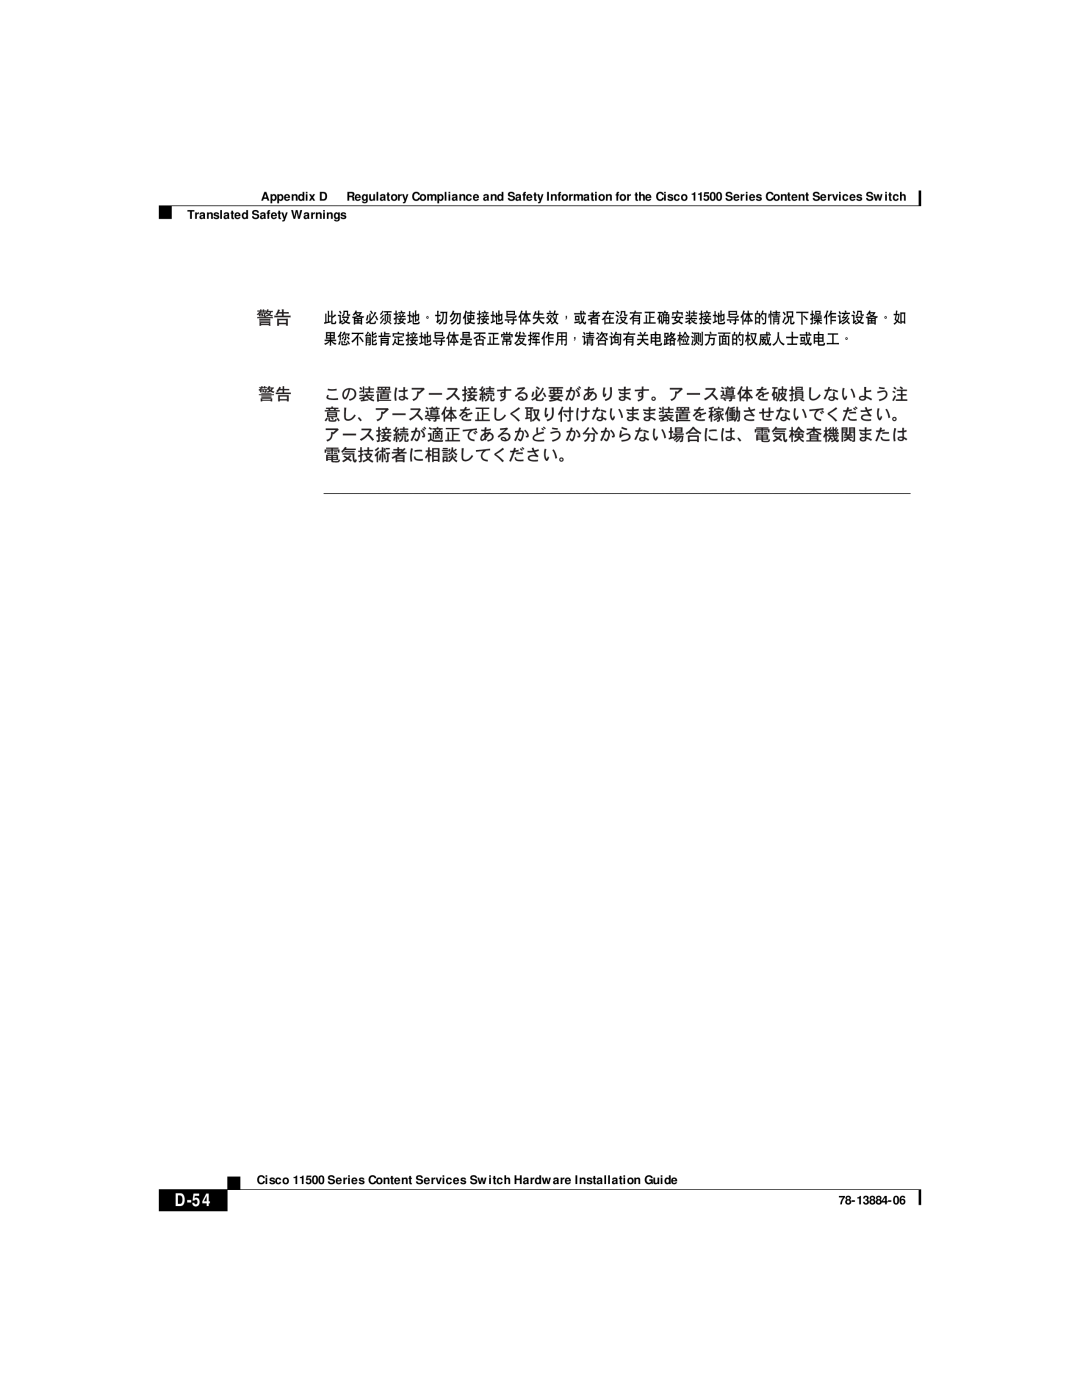 Cisco Systems 11501, 11506, 11503, 11500 appendix D-54, Translated Safety Warnings, 78-13884-06 